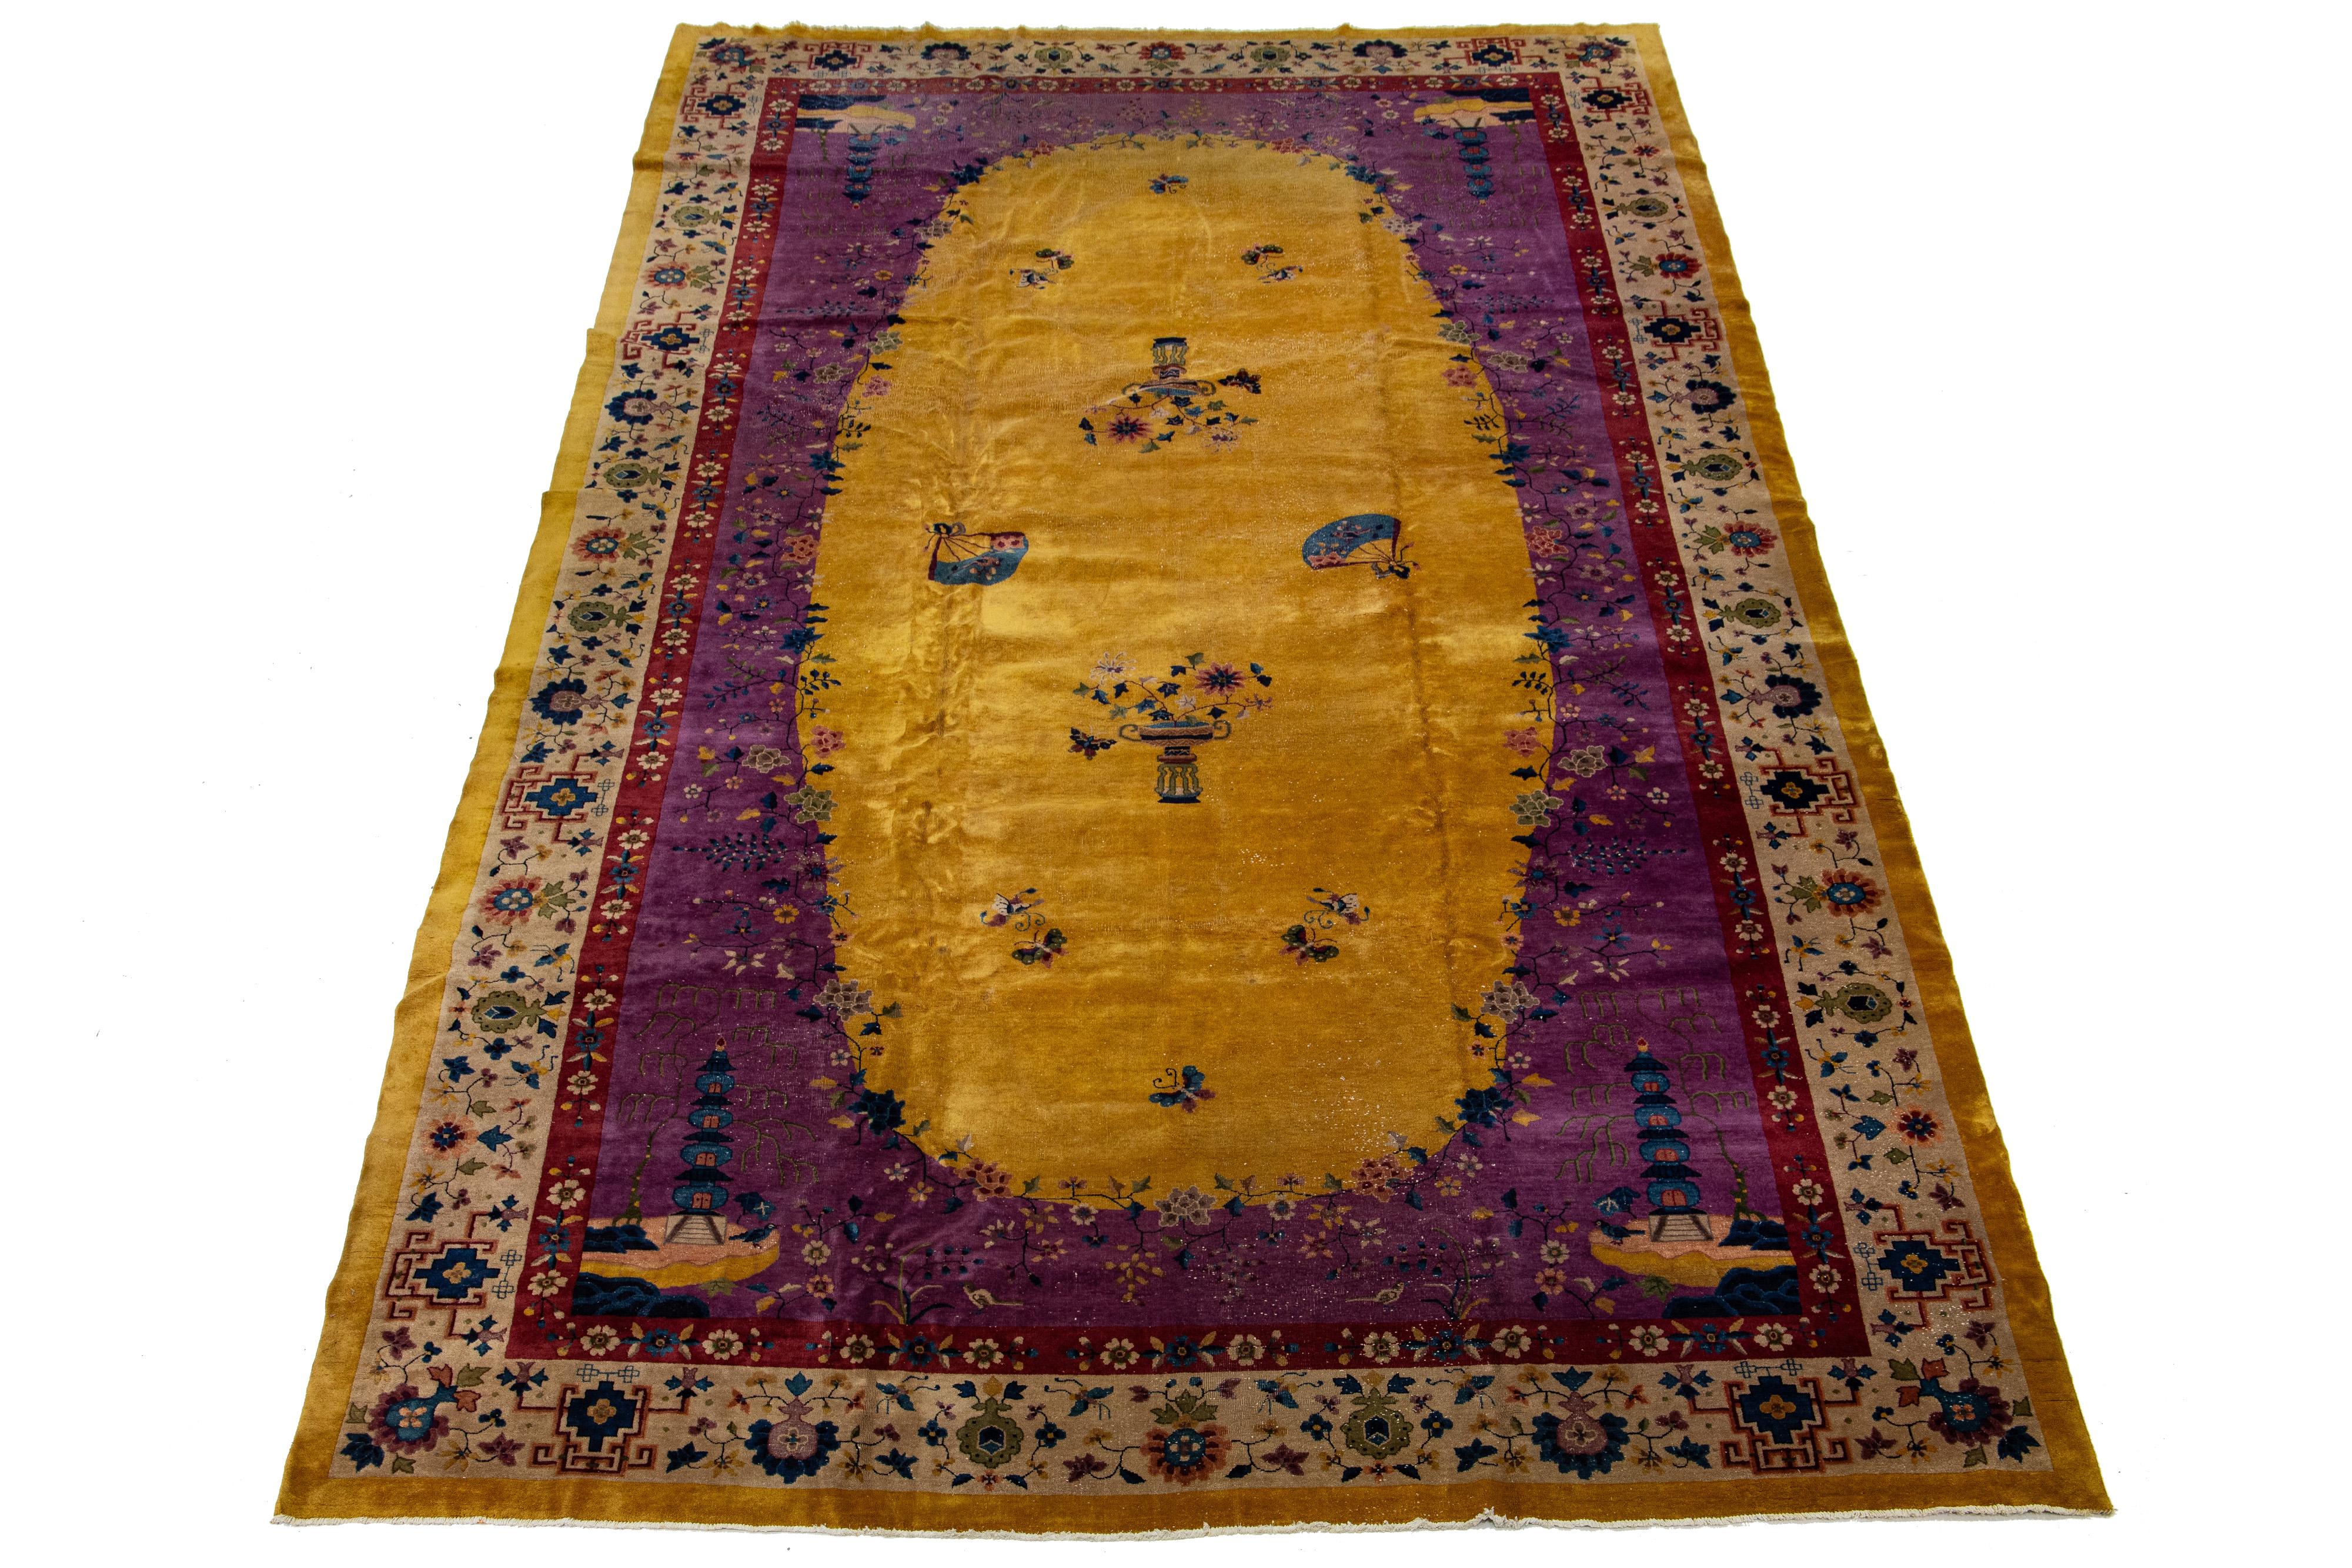 This hand-knotted wool rug showcases Art Deco style and features a goldenrod field complemented by a designed frame. The traditional Chinese floral design has stunning multi-colored accents.

This rug measures 12' x 21'3